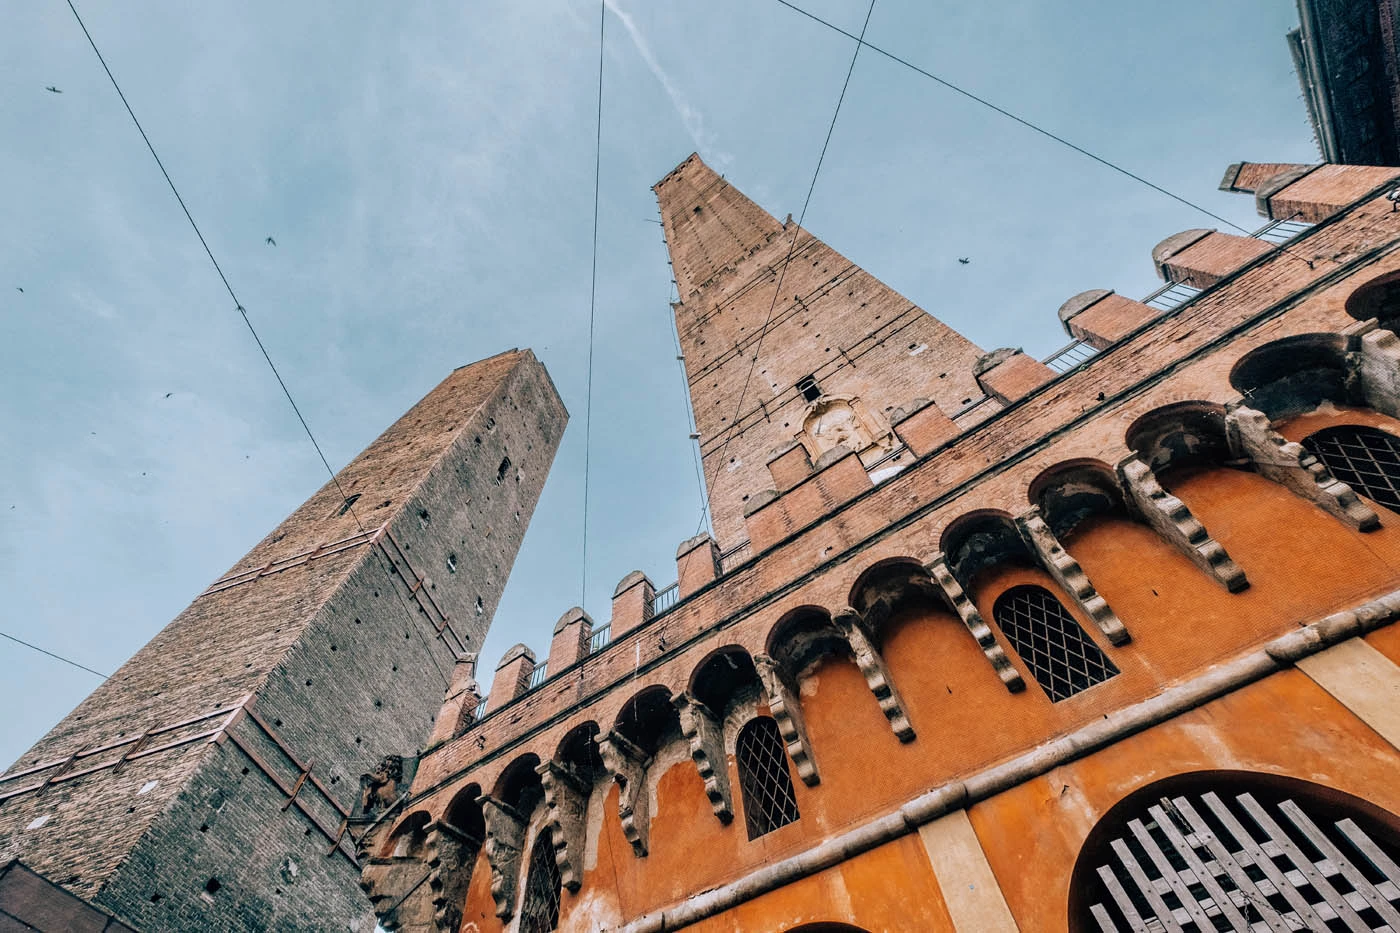 Where to Stay in Bologna - Asinelli Tower and Garisenda Tower